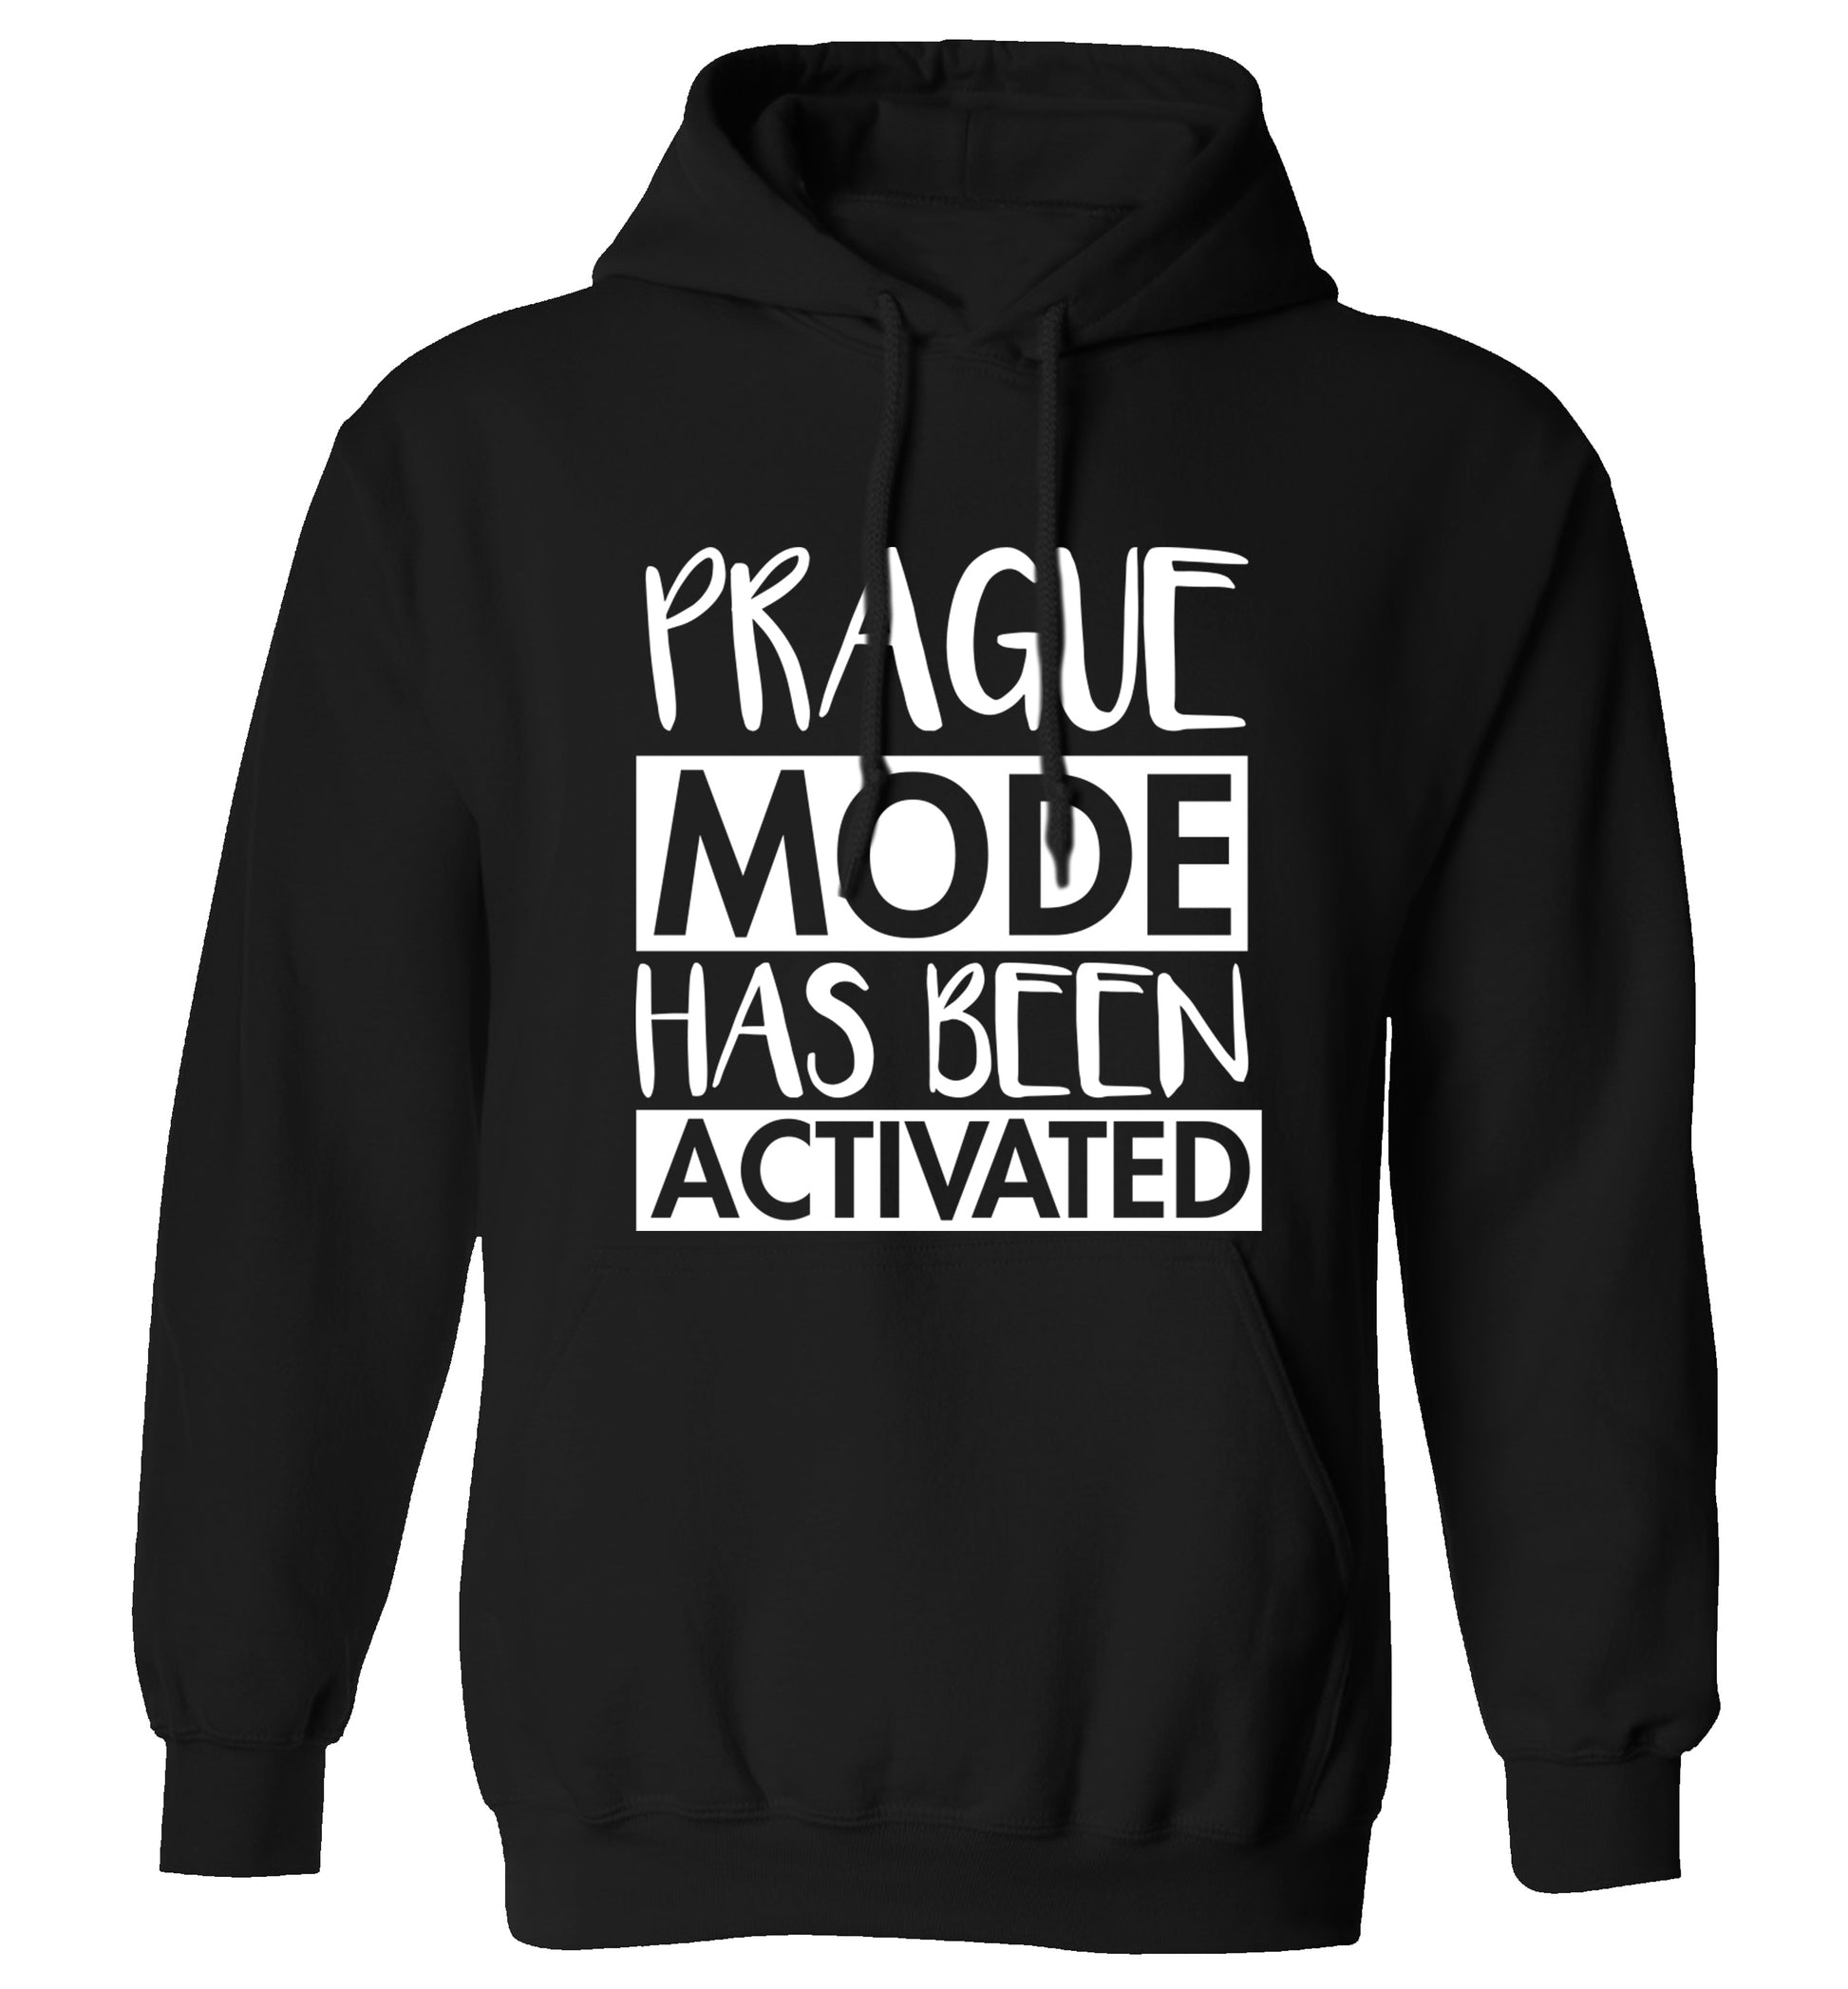 Prague mode has been activated adults unisex black hoodie 2XL